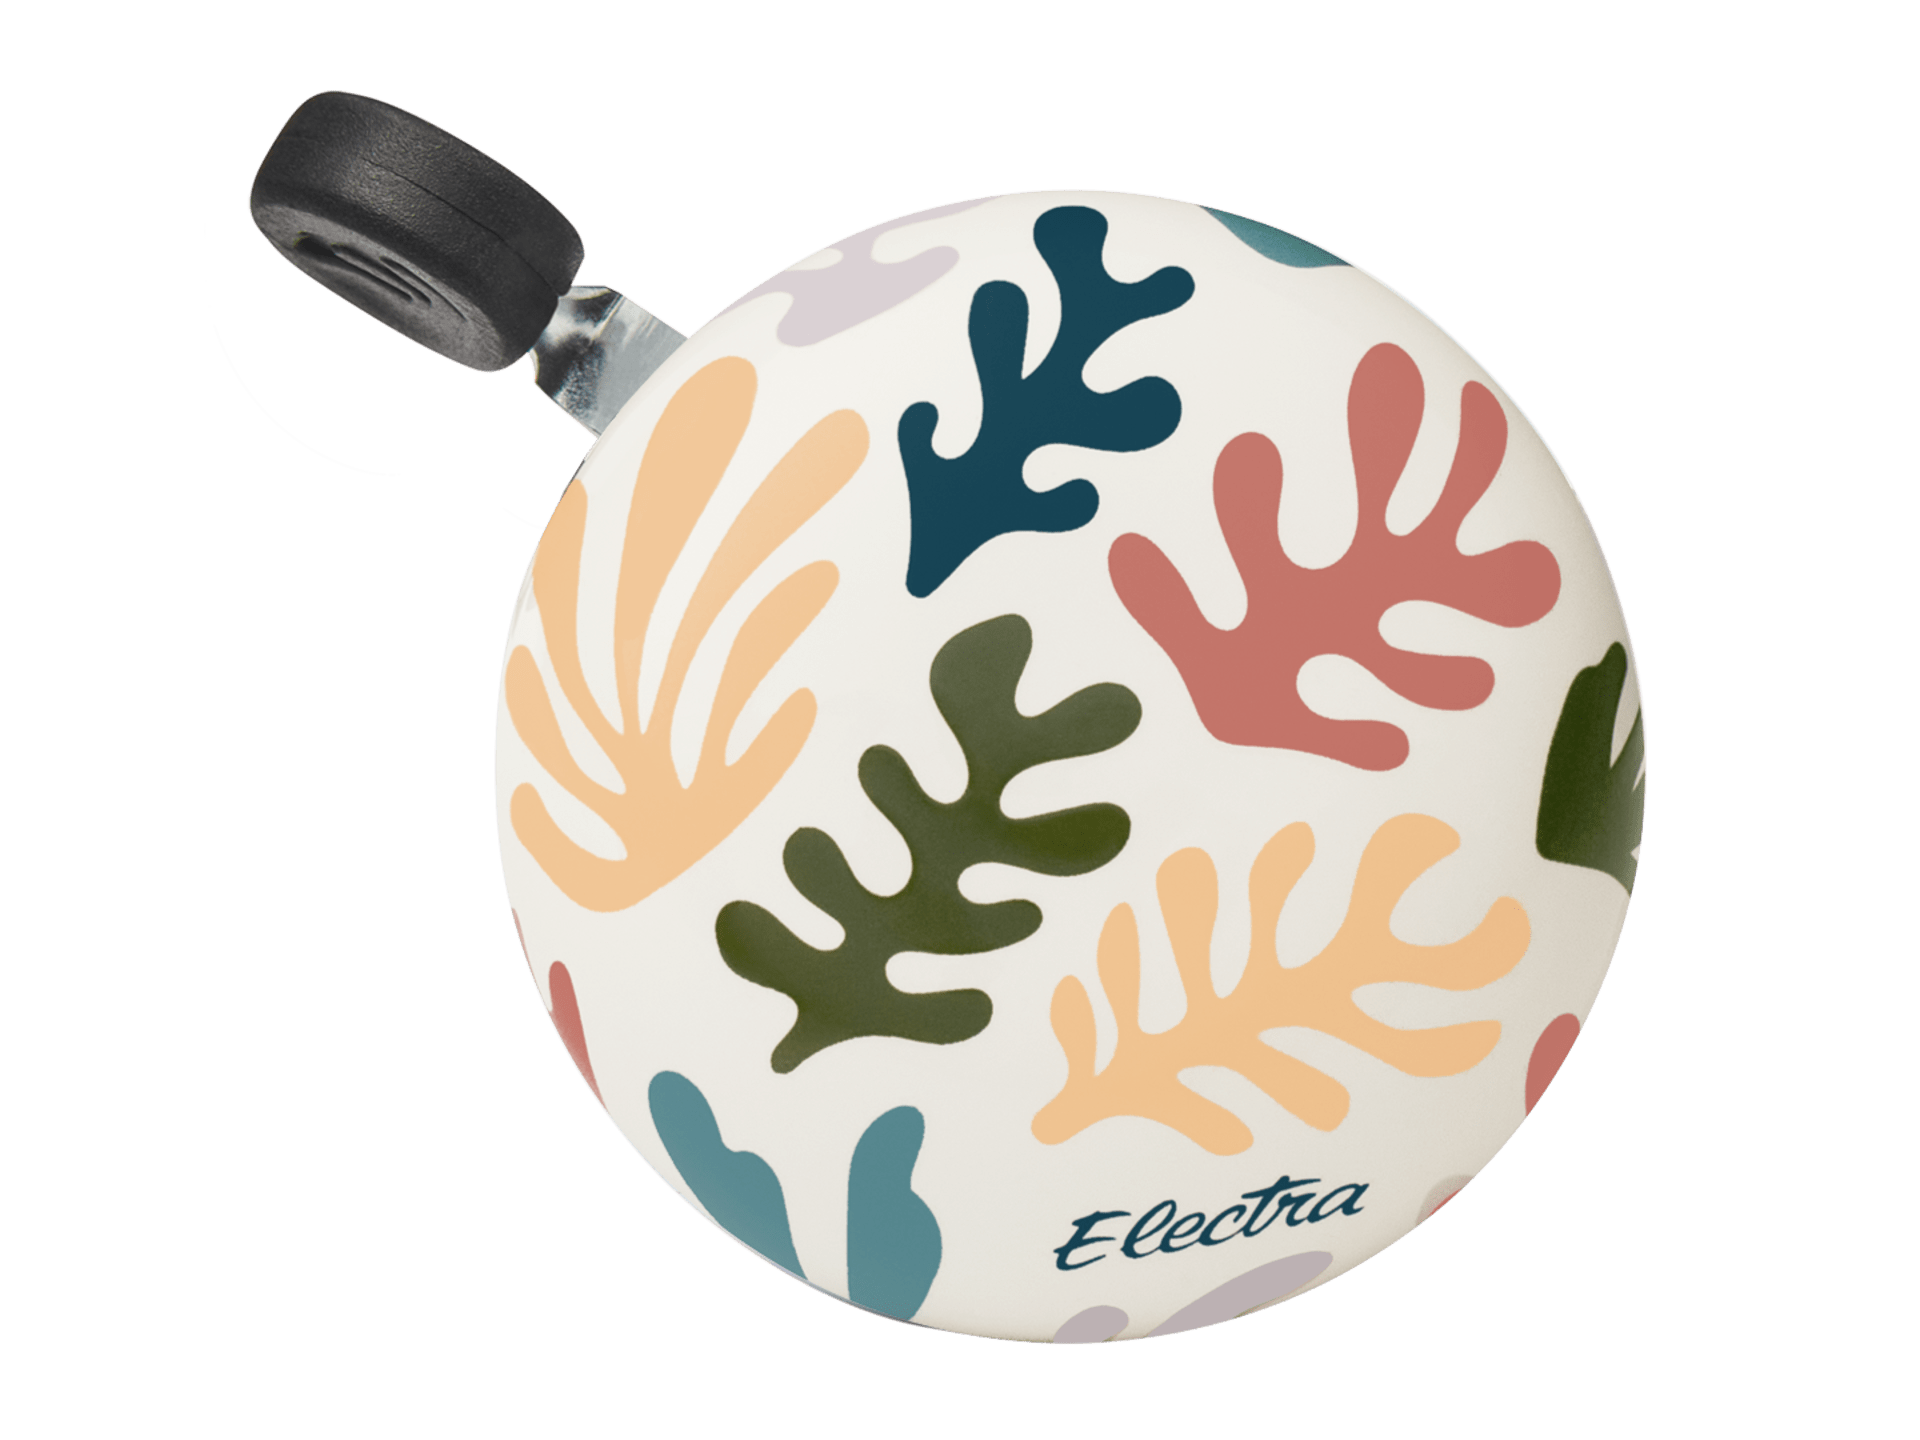 Electra Coral Reef Small Ding Dong Bike Bell